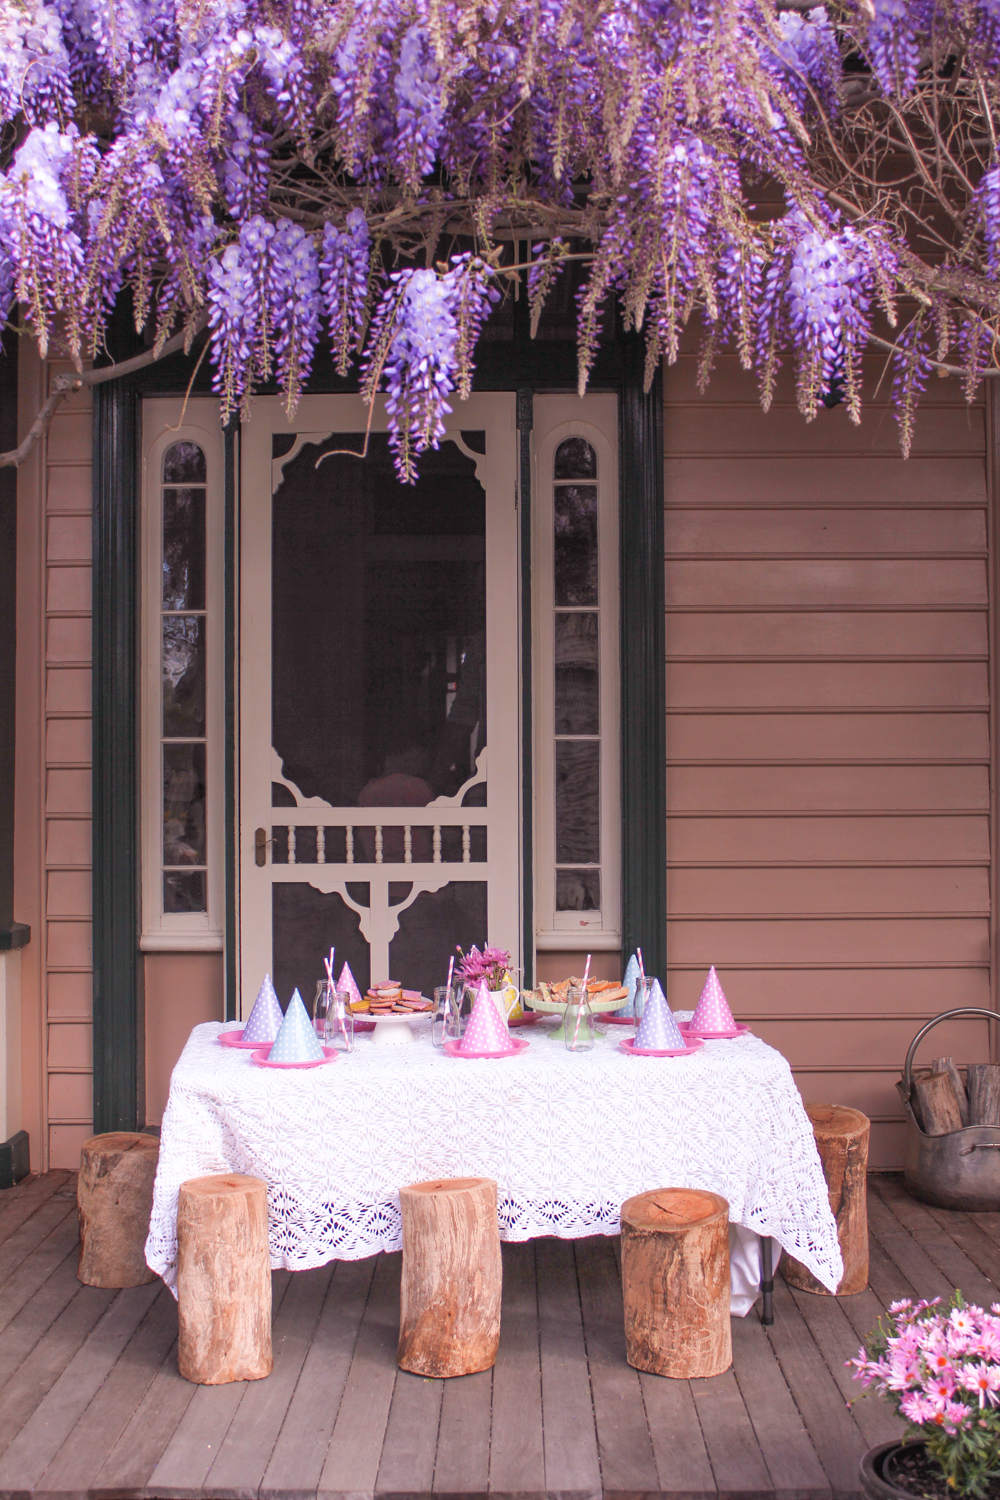 Kids party table on the porch under the wisteria